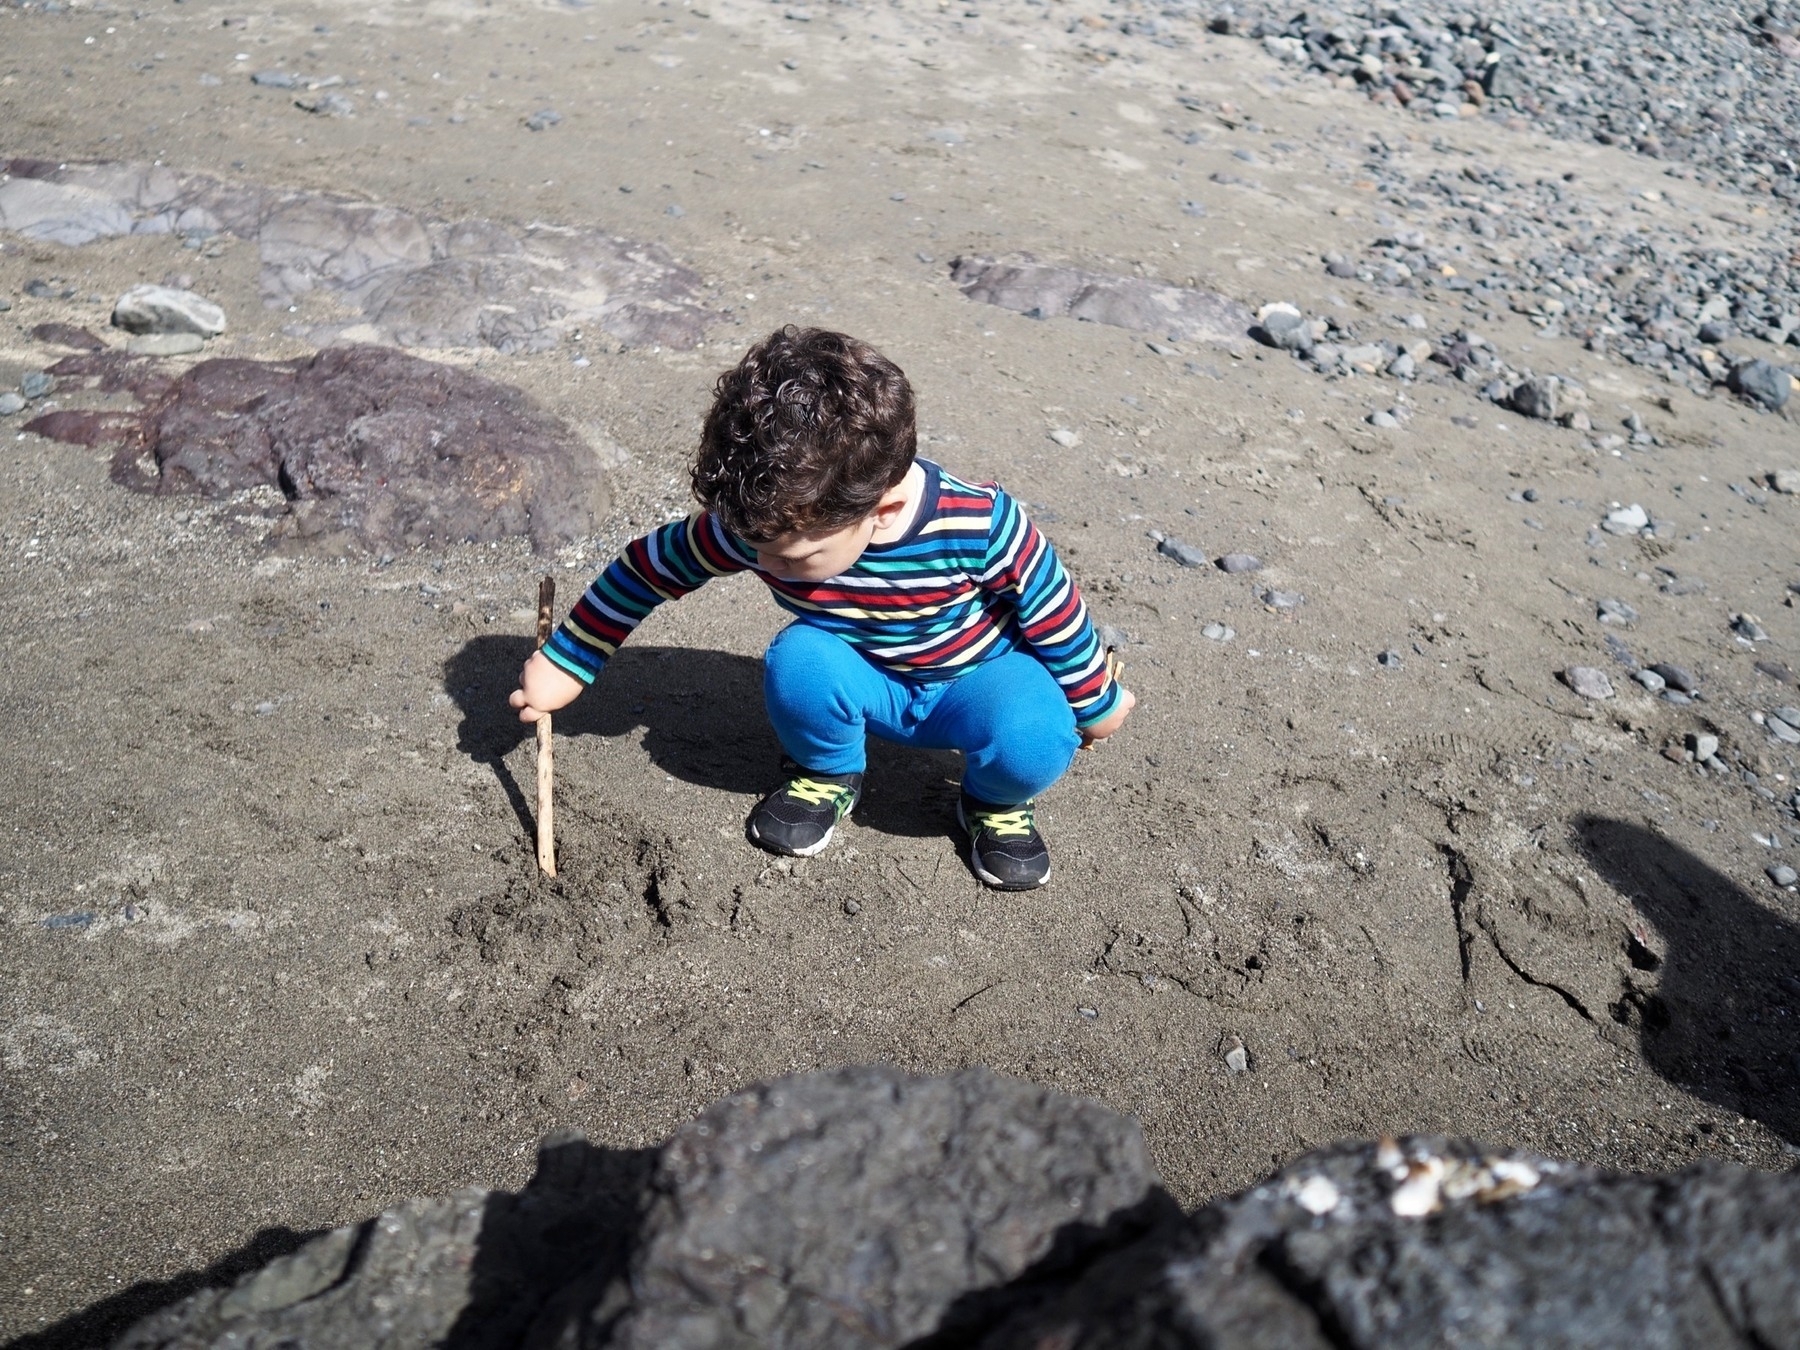 A young boy draws in sand with a stick.